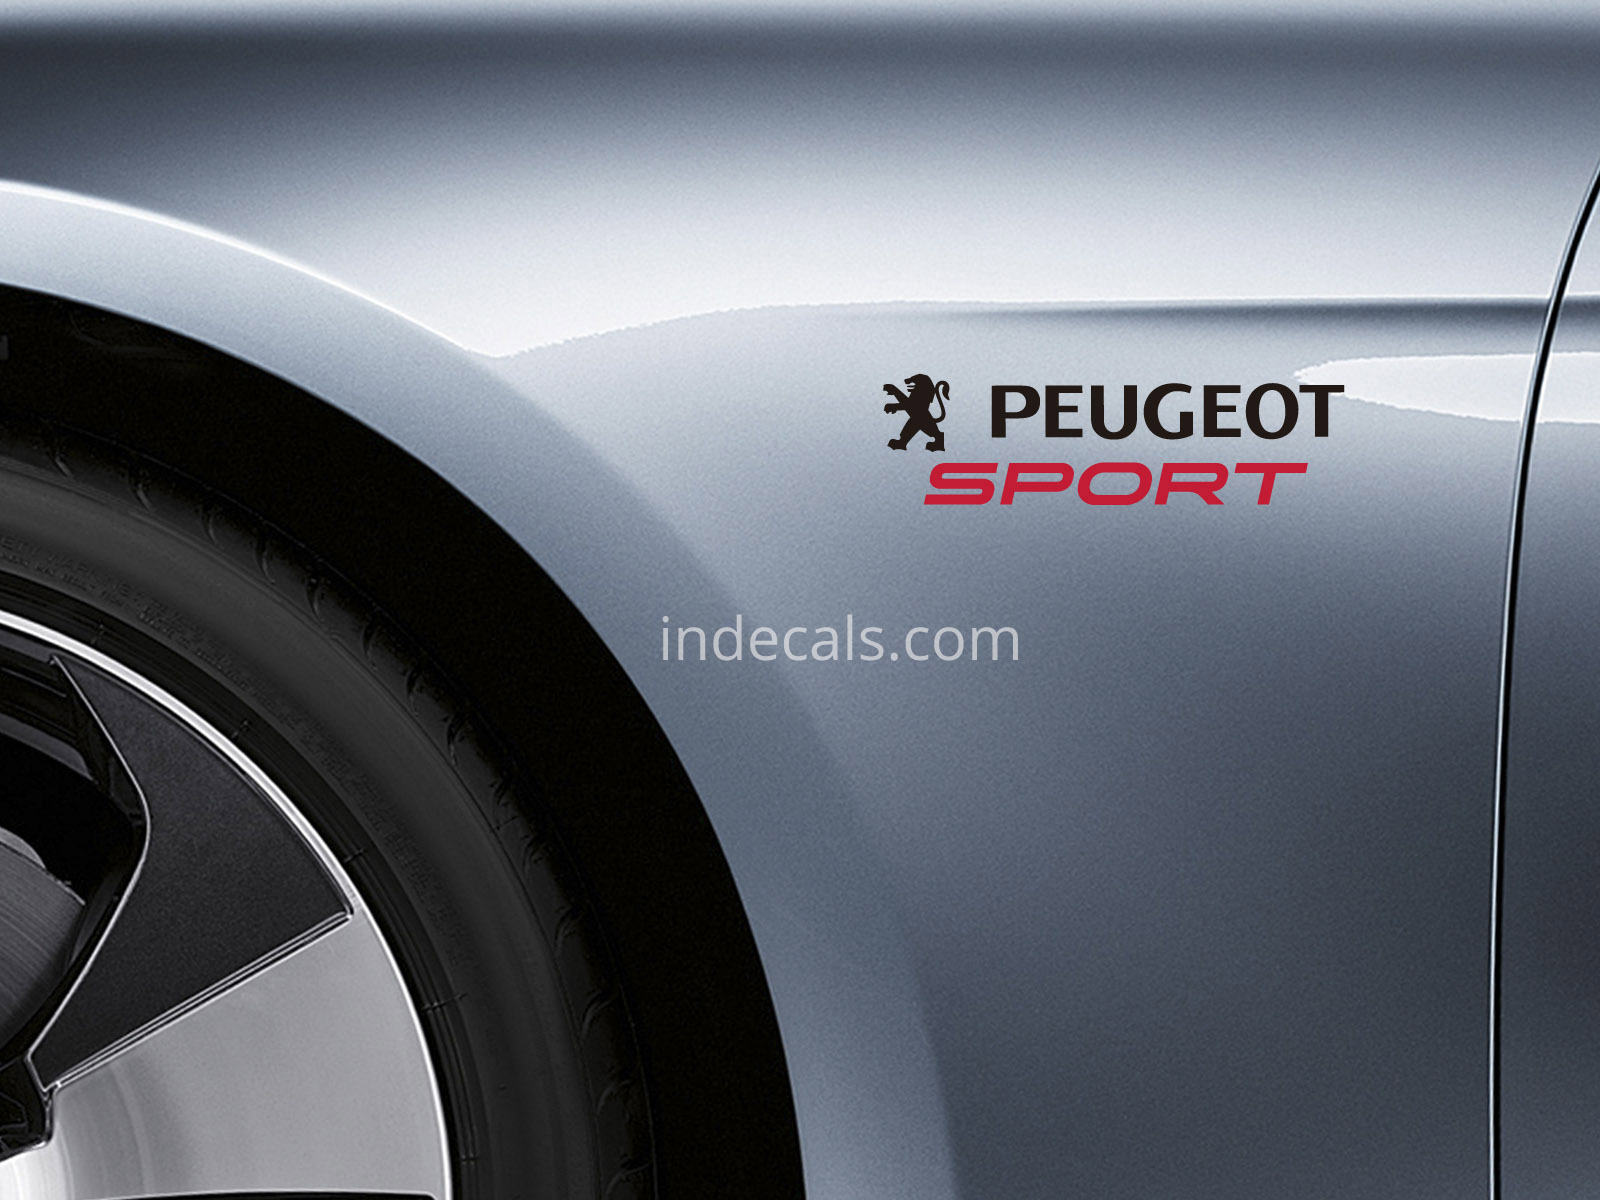 2 x Peugeot Sports stickers for Wings - Black & Red